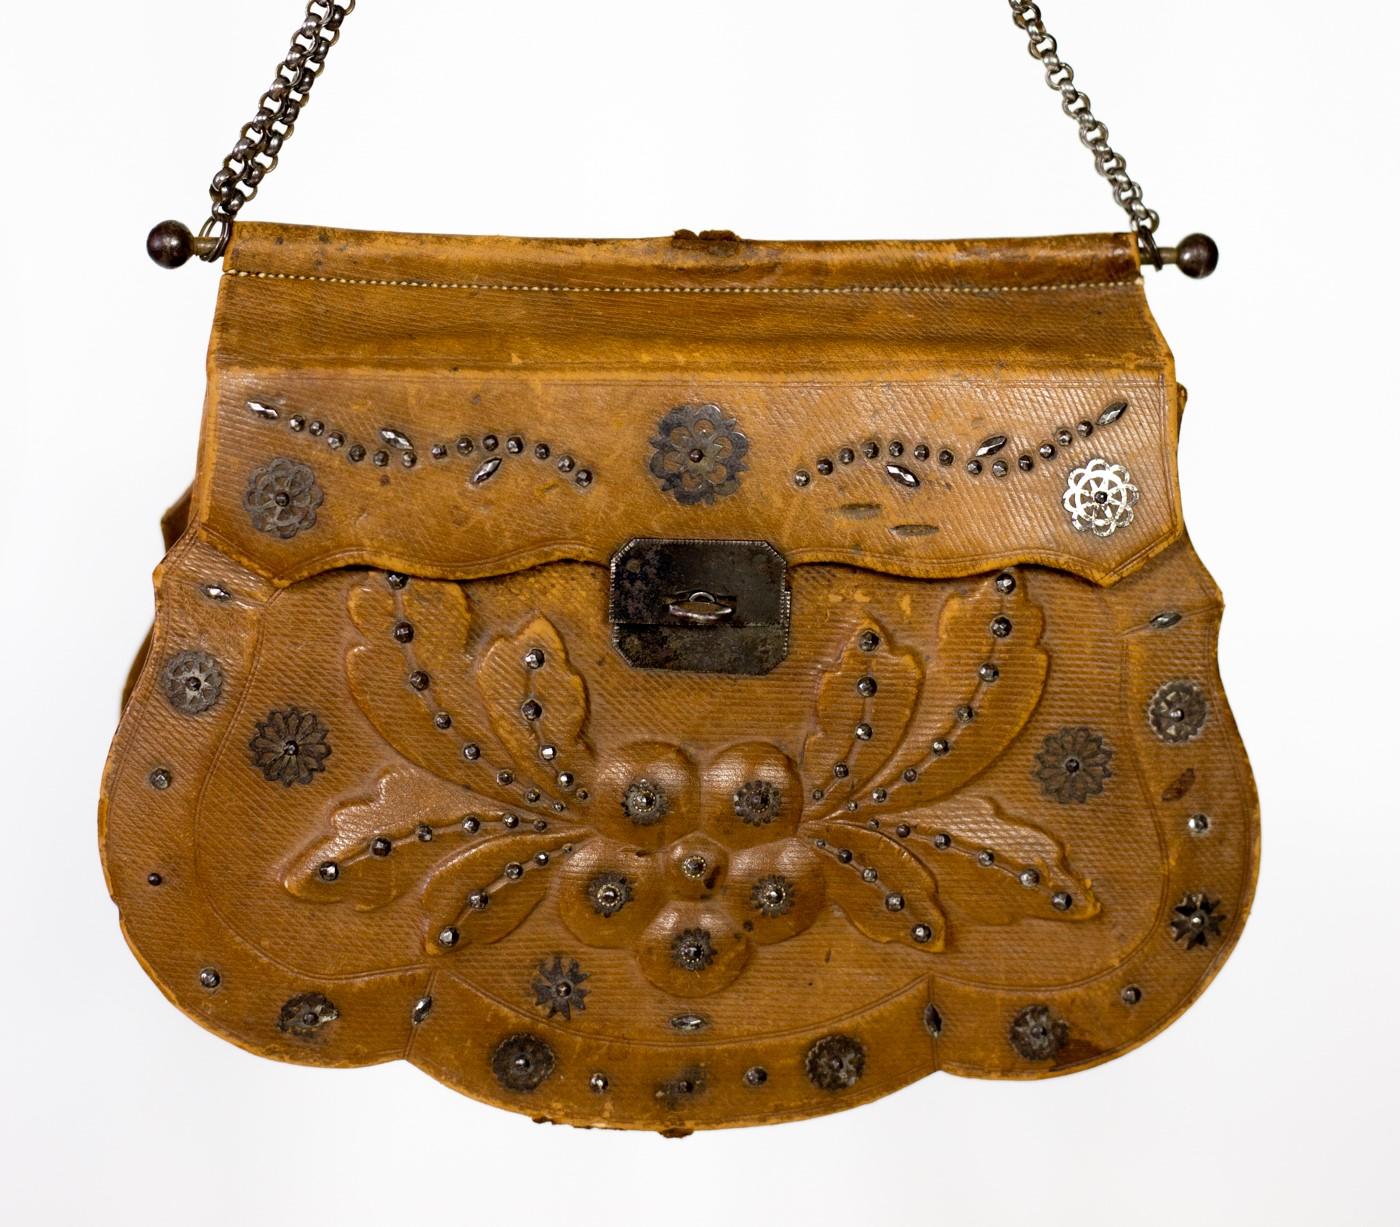 Circa 1795/1815
France

Rare Violin-shaped reticule in embossed morocco, sequins and polished steel beads, complete with its original chain and dating from the first quarter of the 19th century. Rigid frame with cardboard flap covered in leather